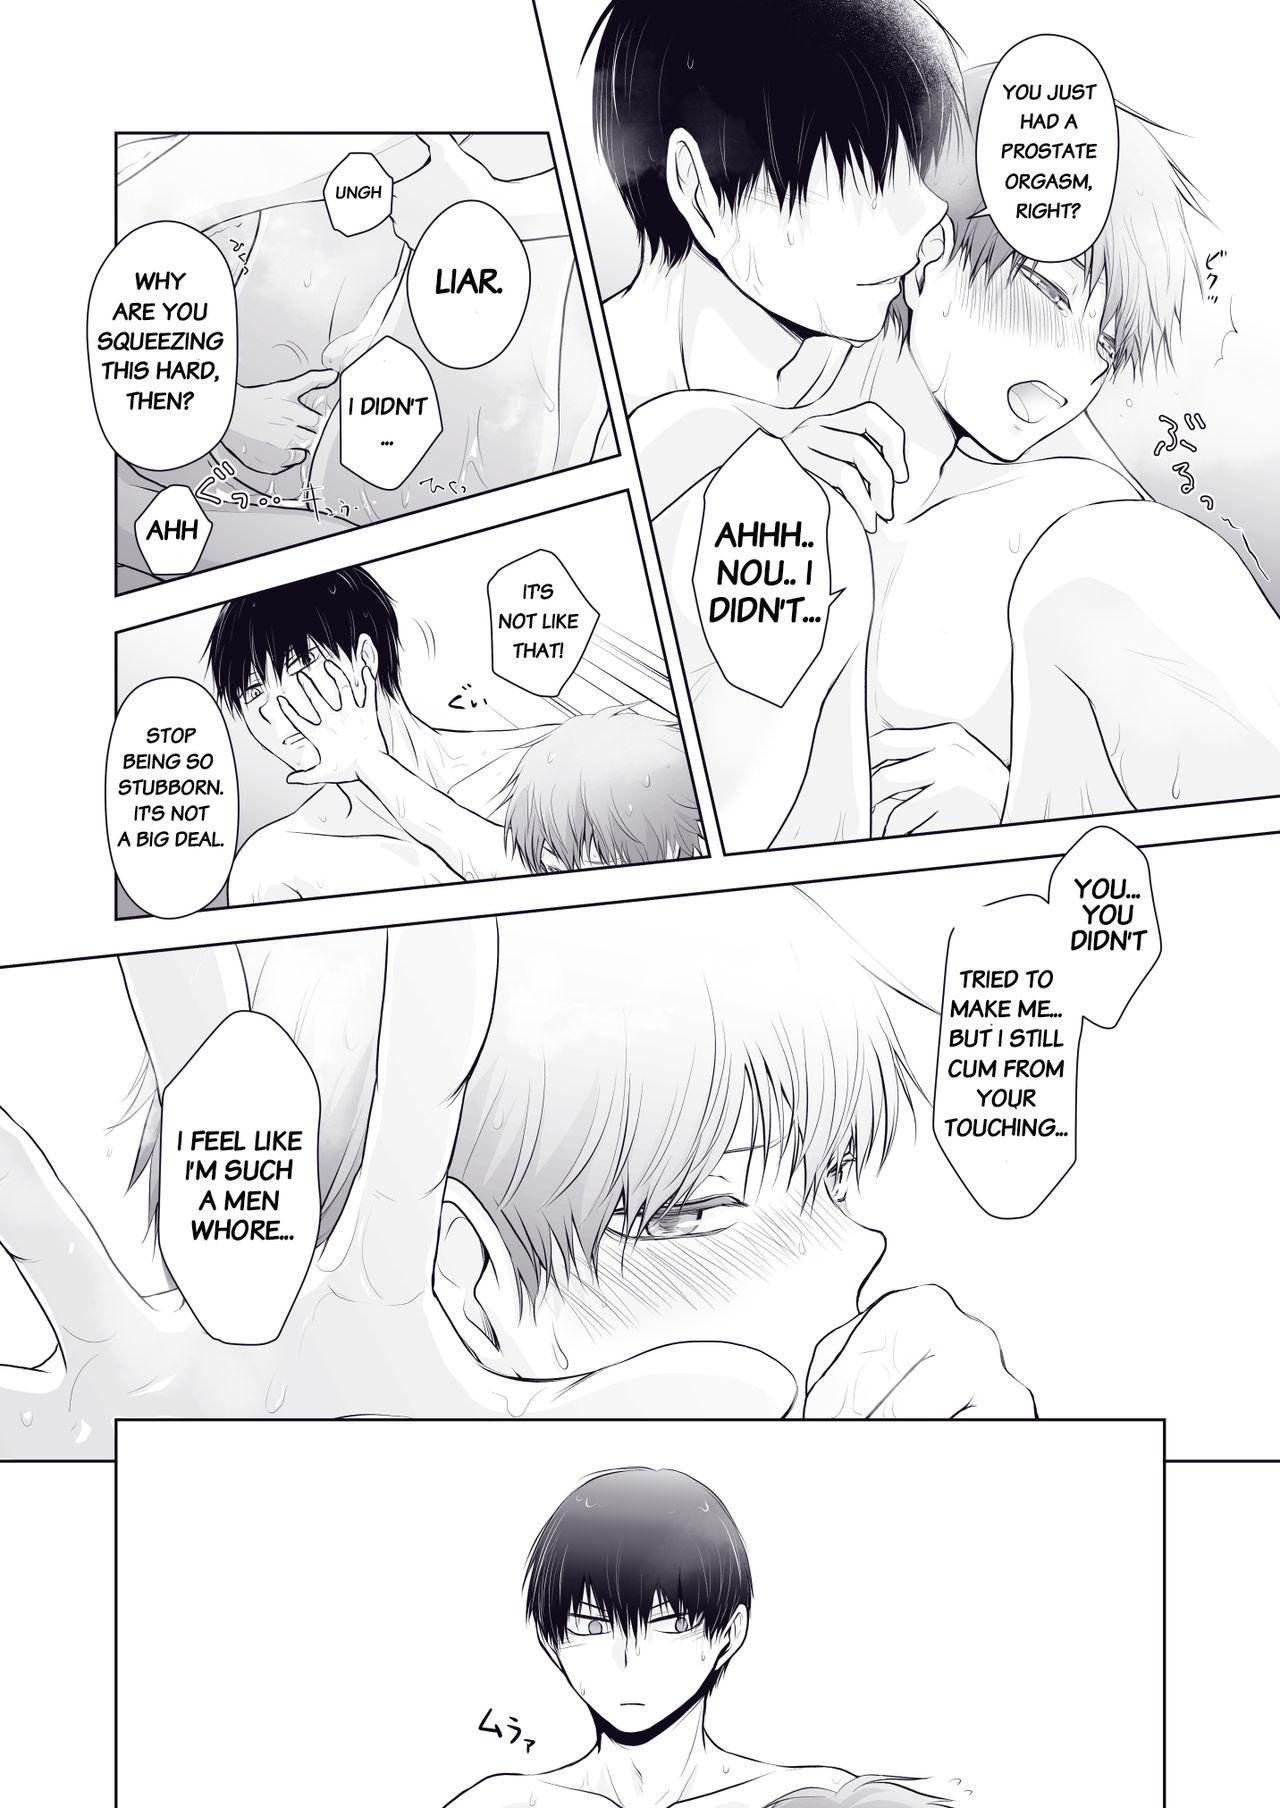 Tanned Would you like a Refill? - Haikyuu Young - Page 5